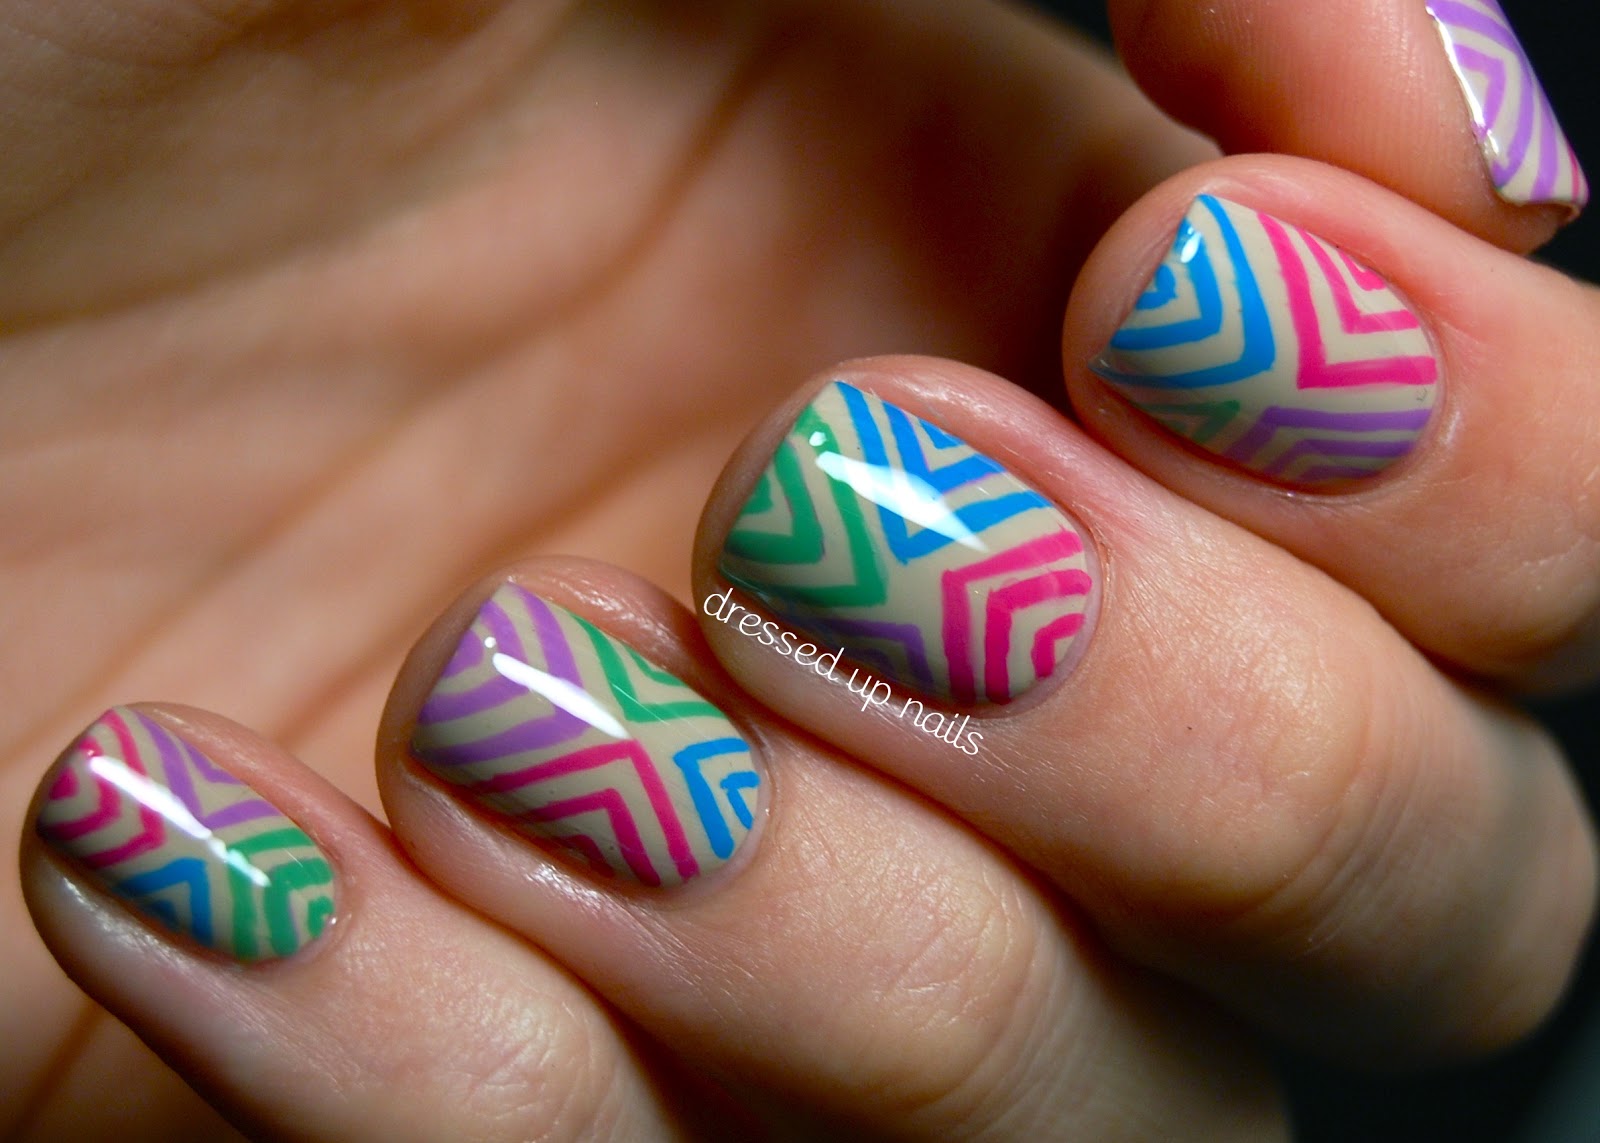 1. Chevron Nail Art Designs for a Chic and Stylish Look - wide 4